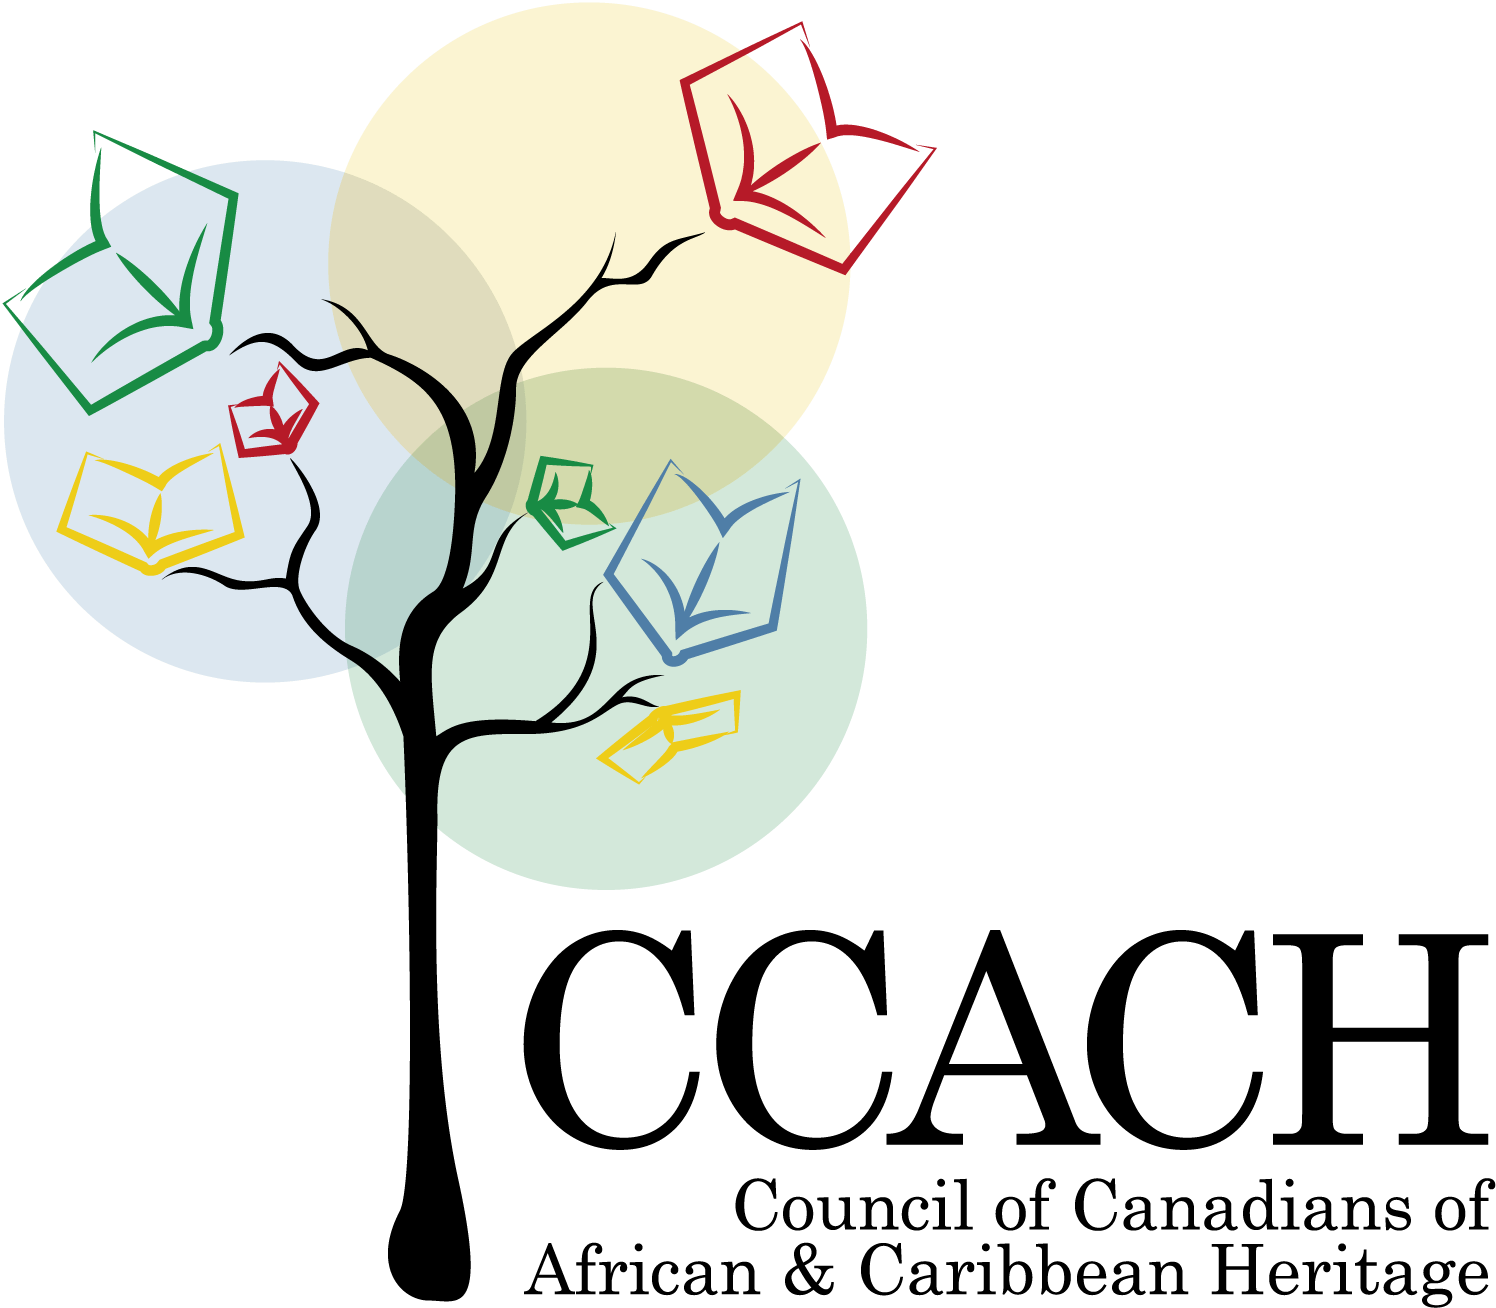 Council of Canadians of African and Caribbean Heritage